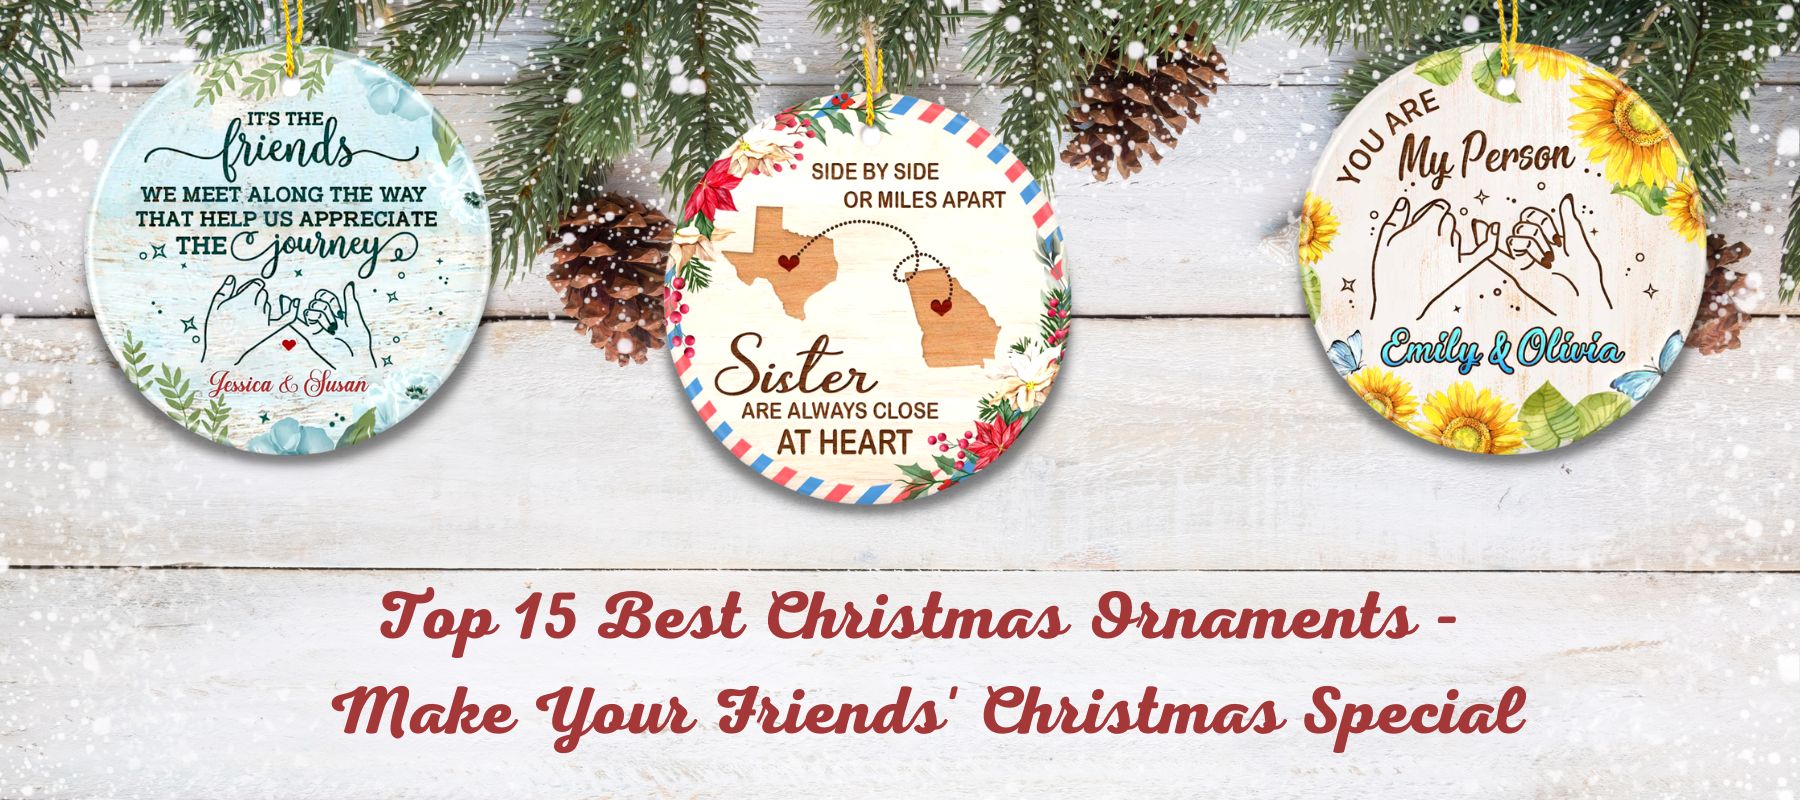 Top 15 Best Christmas Ornaments - Make Your Friends' Christmas Special